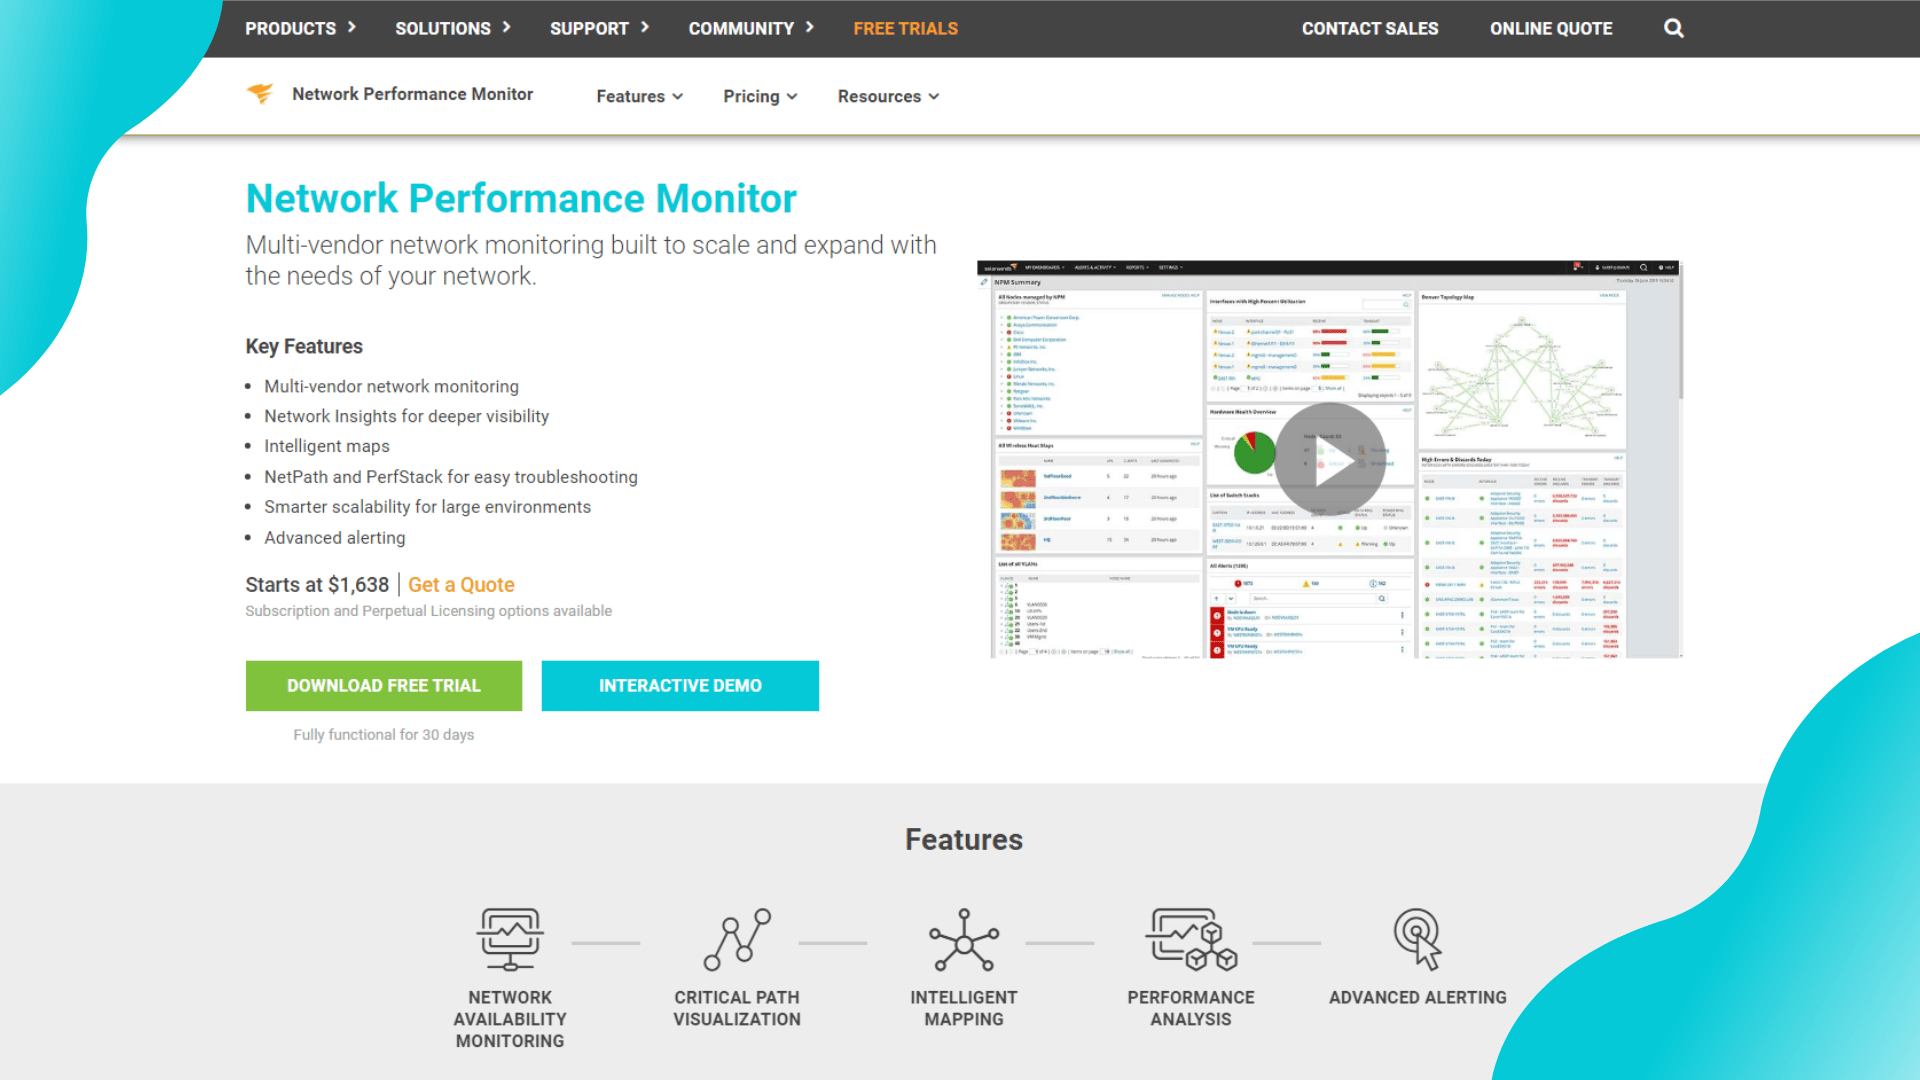 Network Performance Monitor (NPM) Features